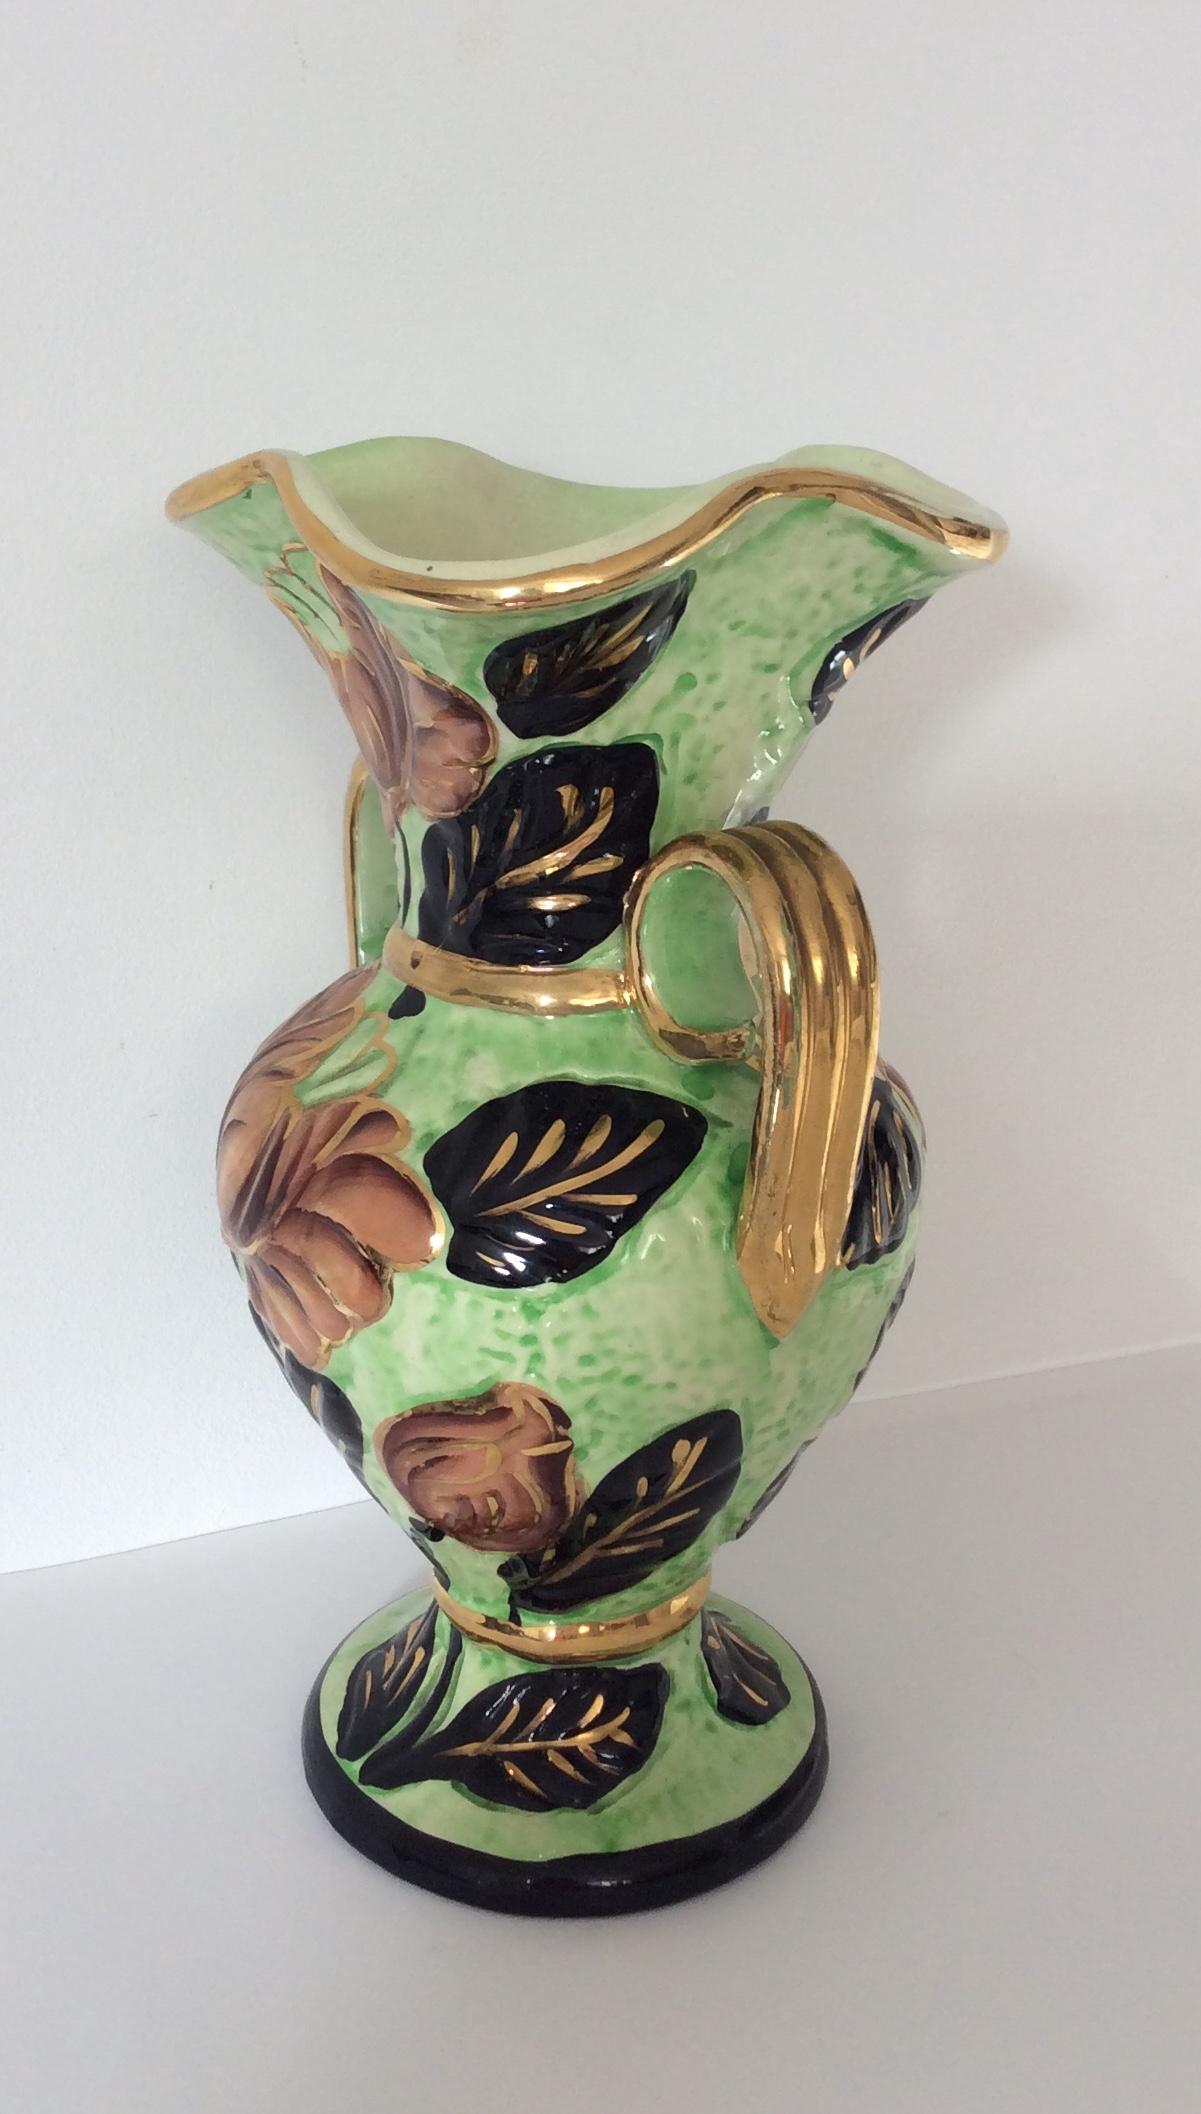 Lovely hand-painted ceramic flower vase from Vallauris, France. 
Signed Vallauris, JH and numbered 503.

Gold trim finish and beautiful floral details makes this hand-painted ceramic flower vase appealing. An eye-catching piece of decorative art.